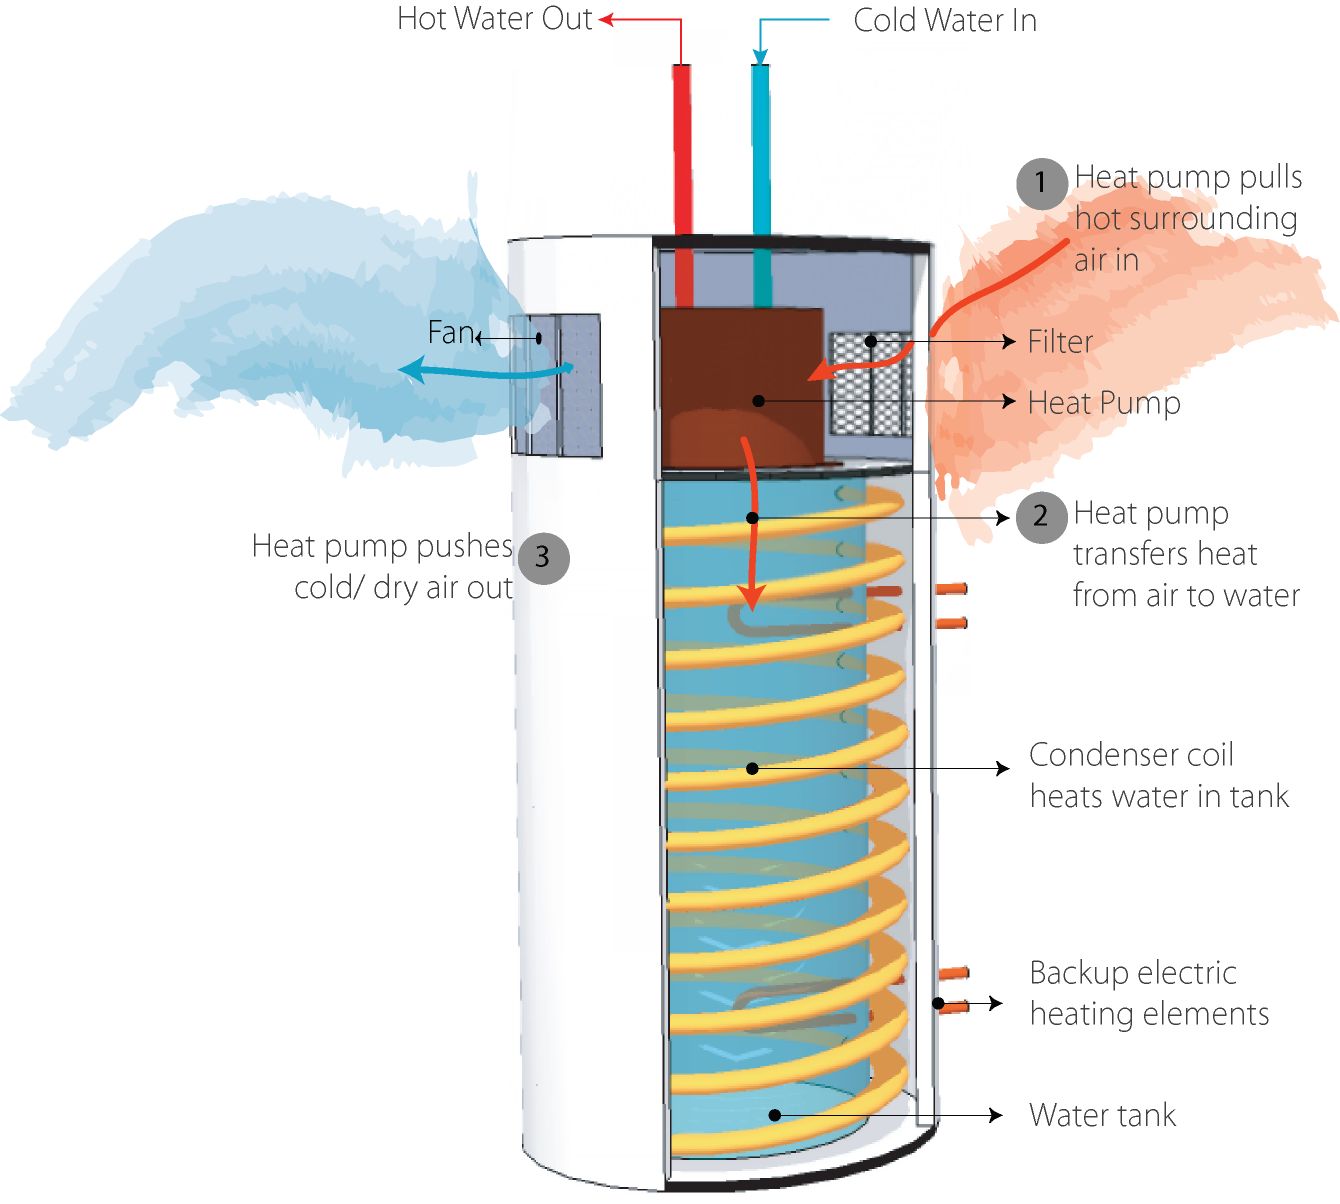 Heat-pump hot water systems